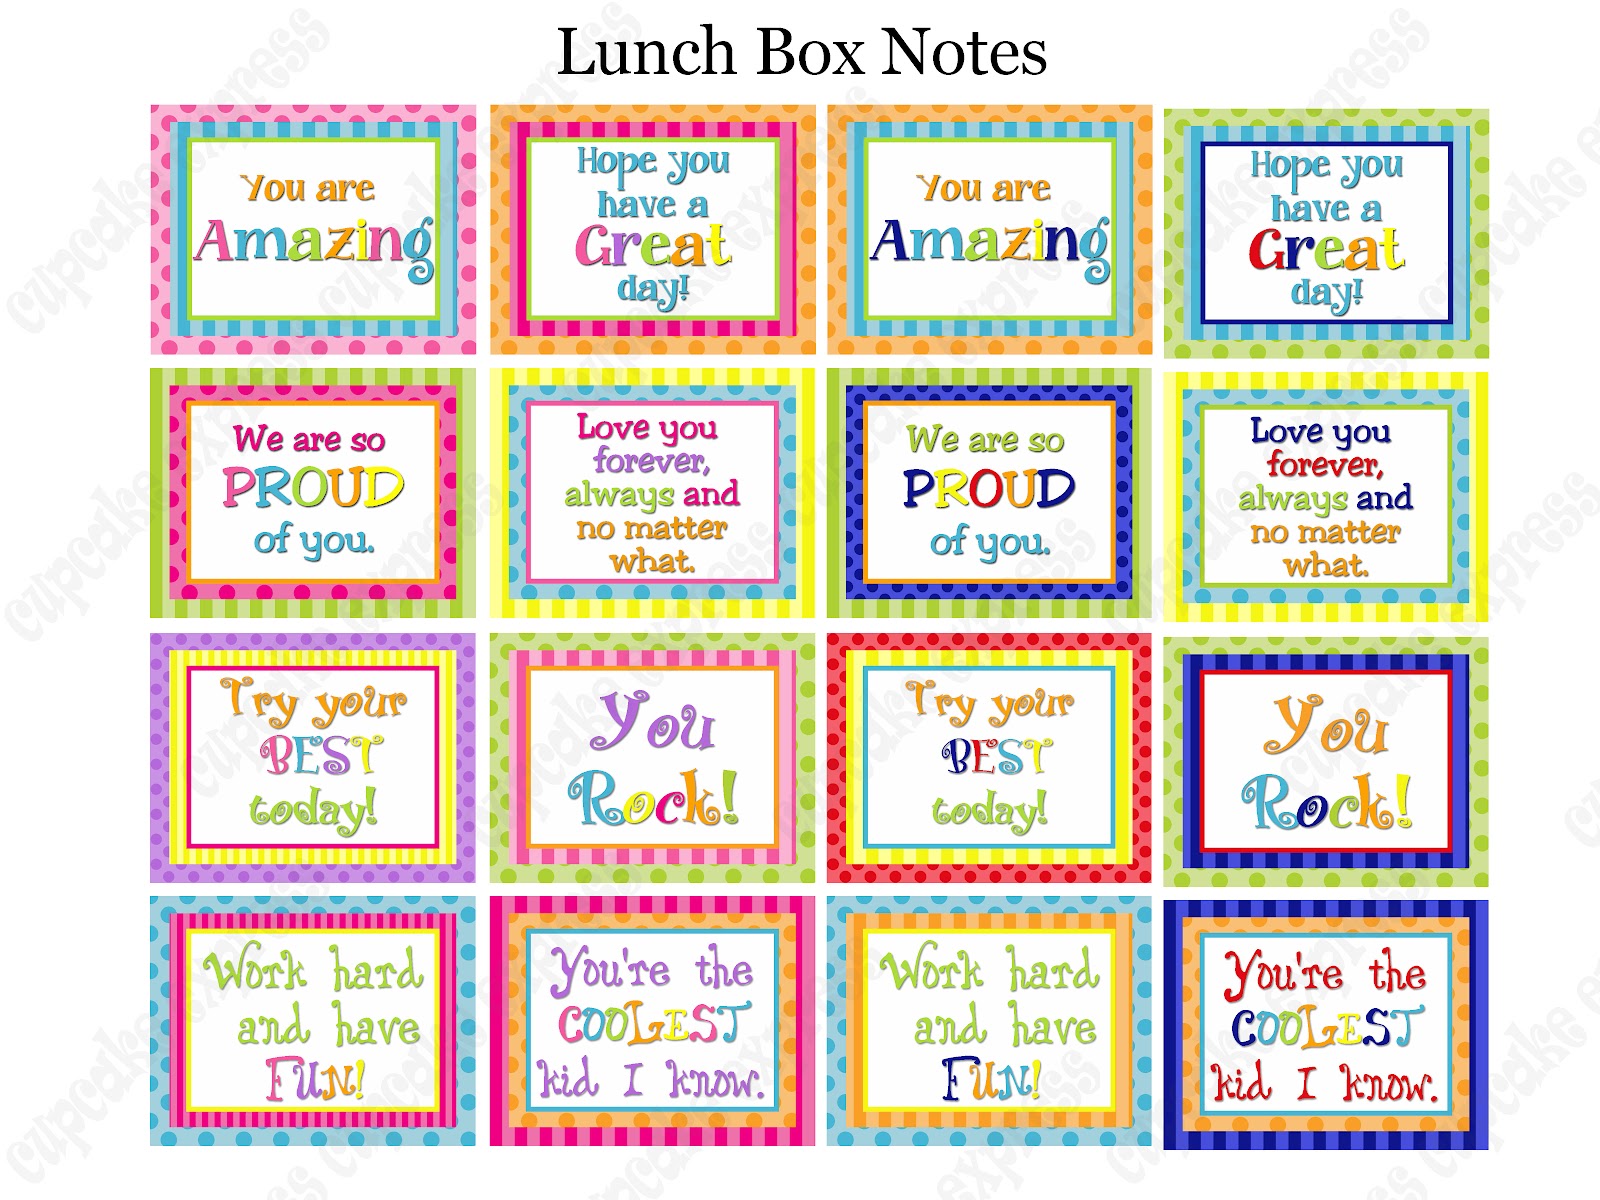 cupcake-express-free-printable-lunch-box-notes